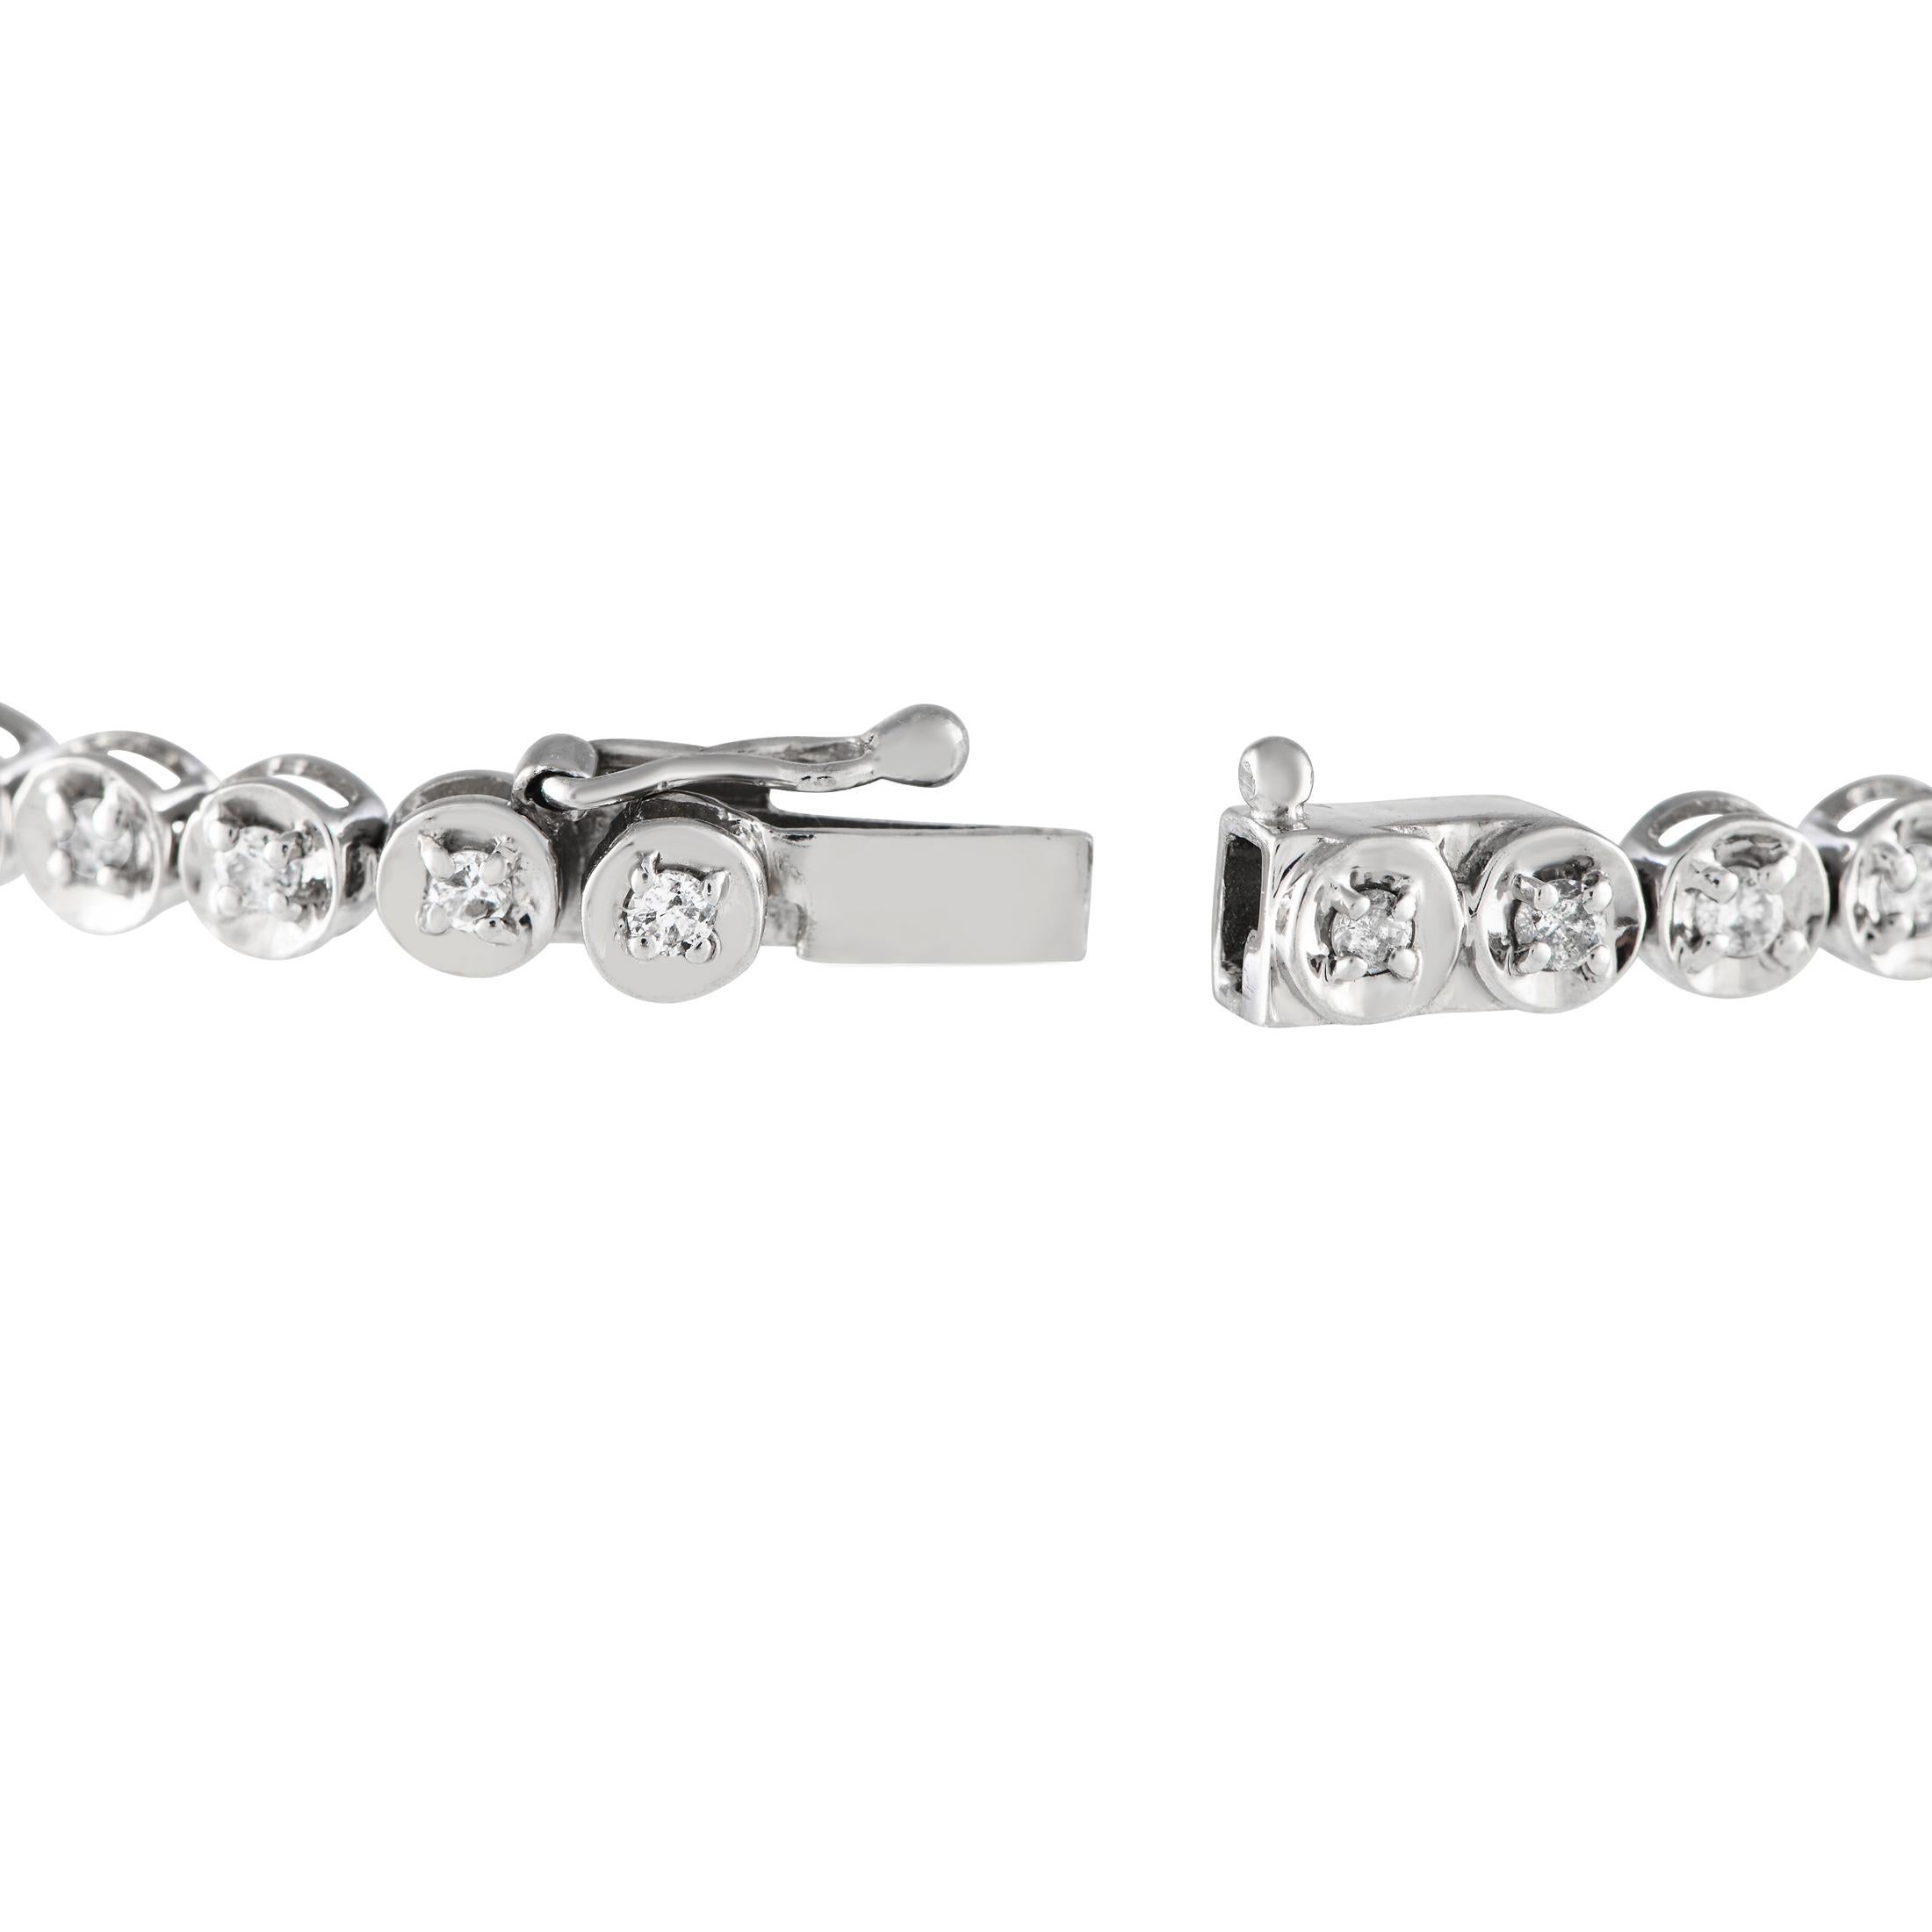 An epitome of minimalistic elegance, this diamond tennis bracelet delivers a non-stop shine that can enhance every attire. The bracelet is designed with a continuous line of petite round diamonds, each mounted on a round four-prong basket. A box tab